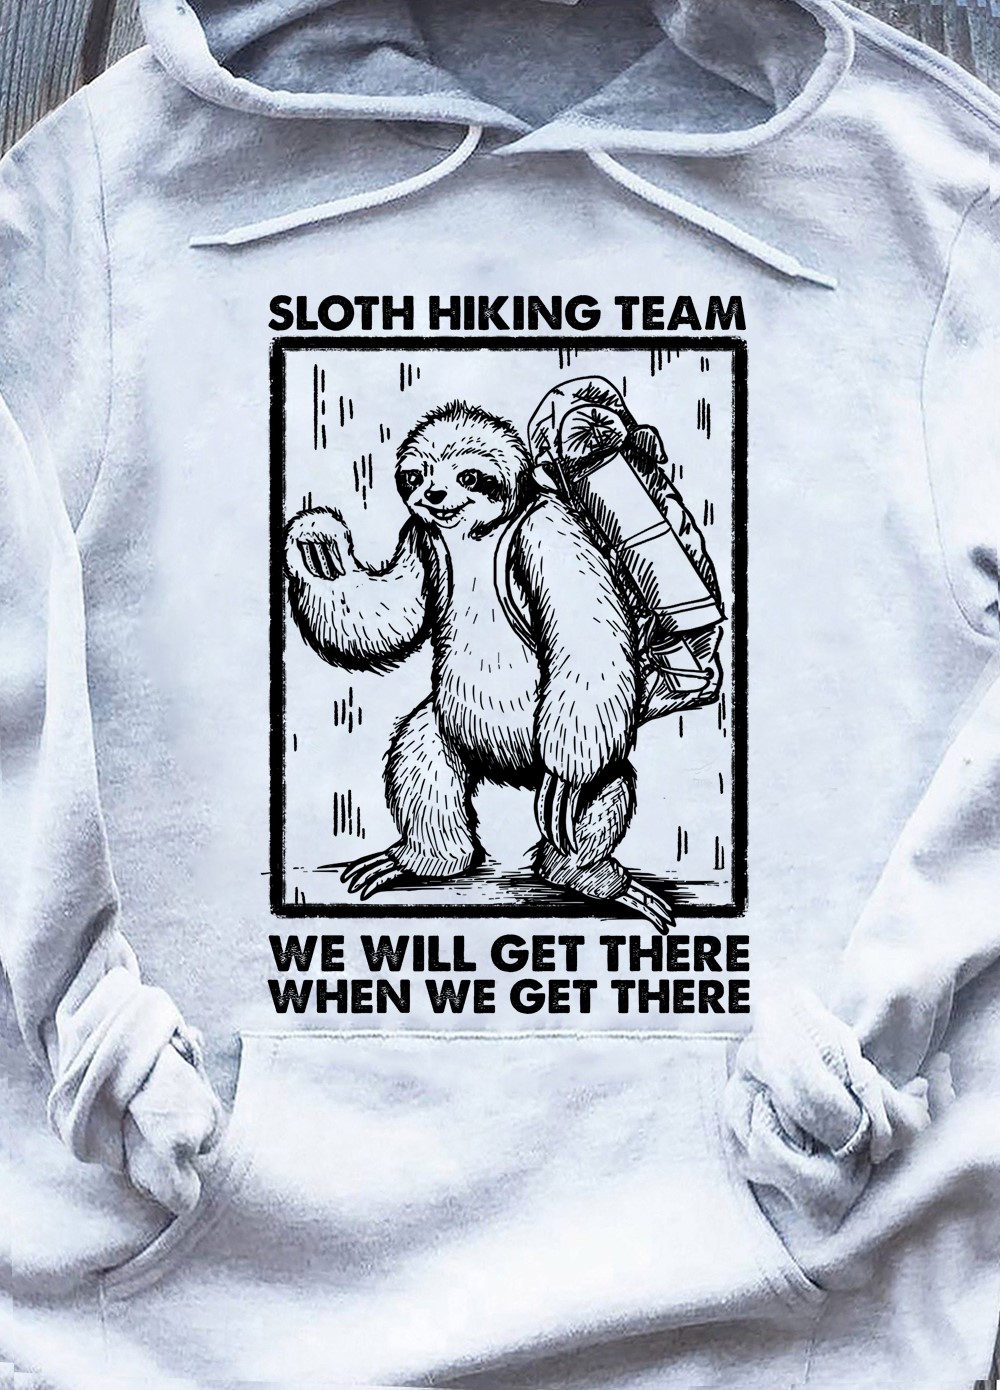 Sloth hiking team we will get there when we get there - Sloth wearing backpack